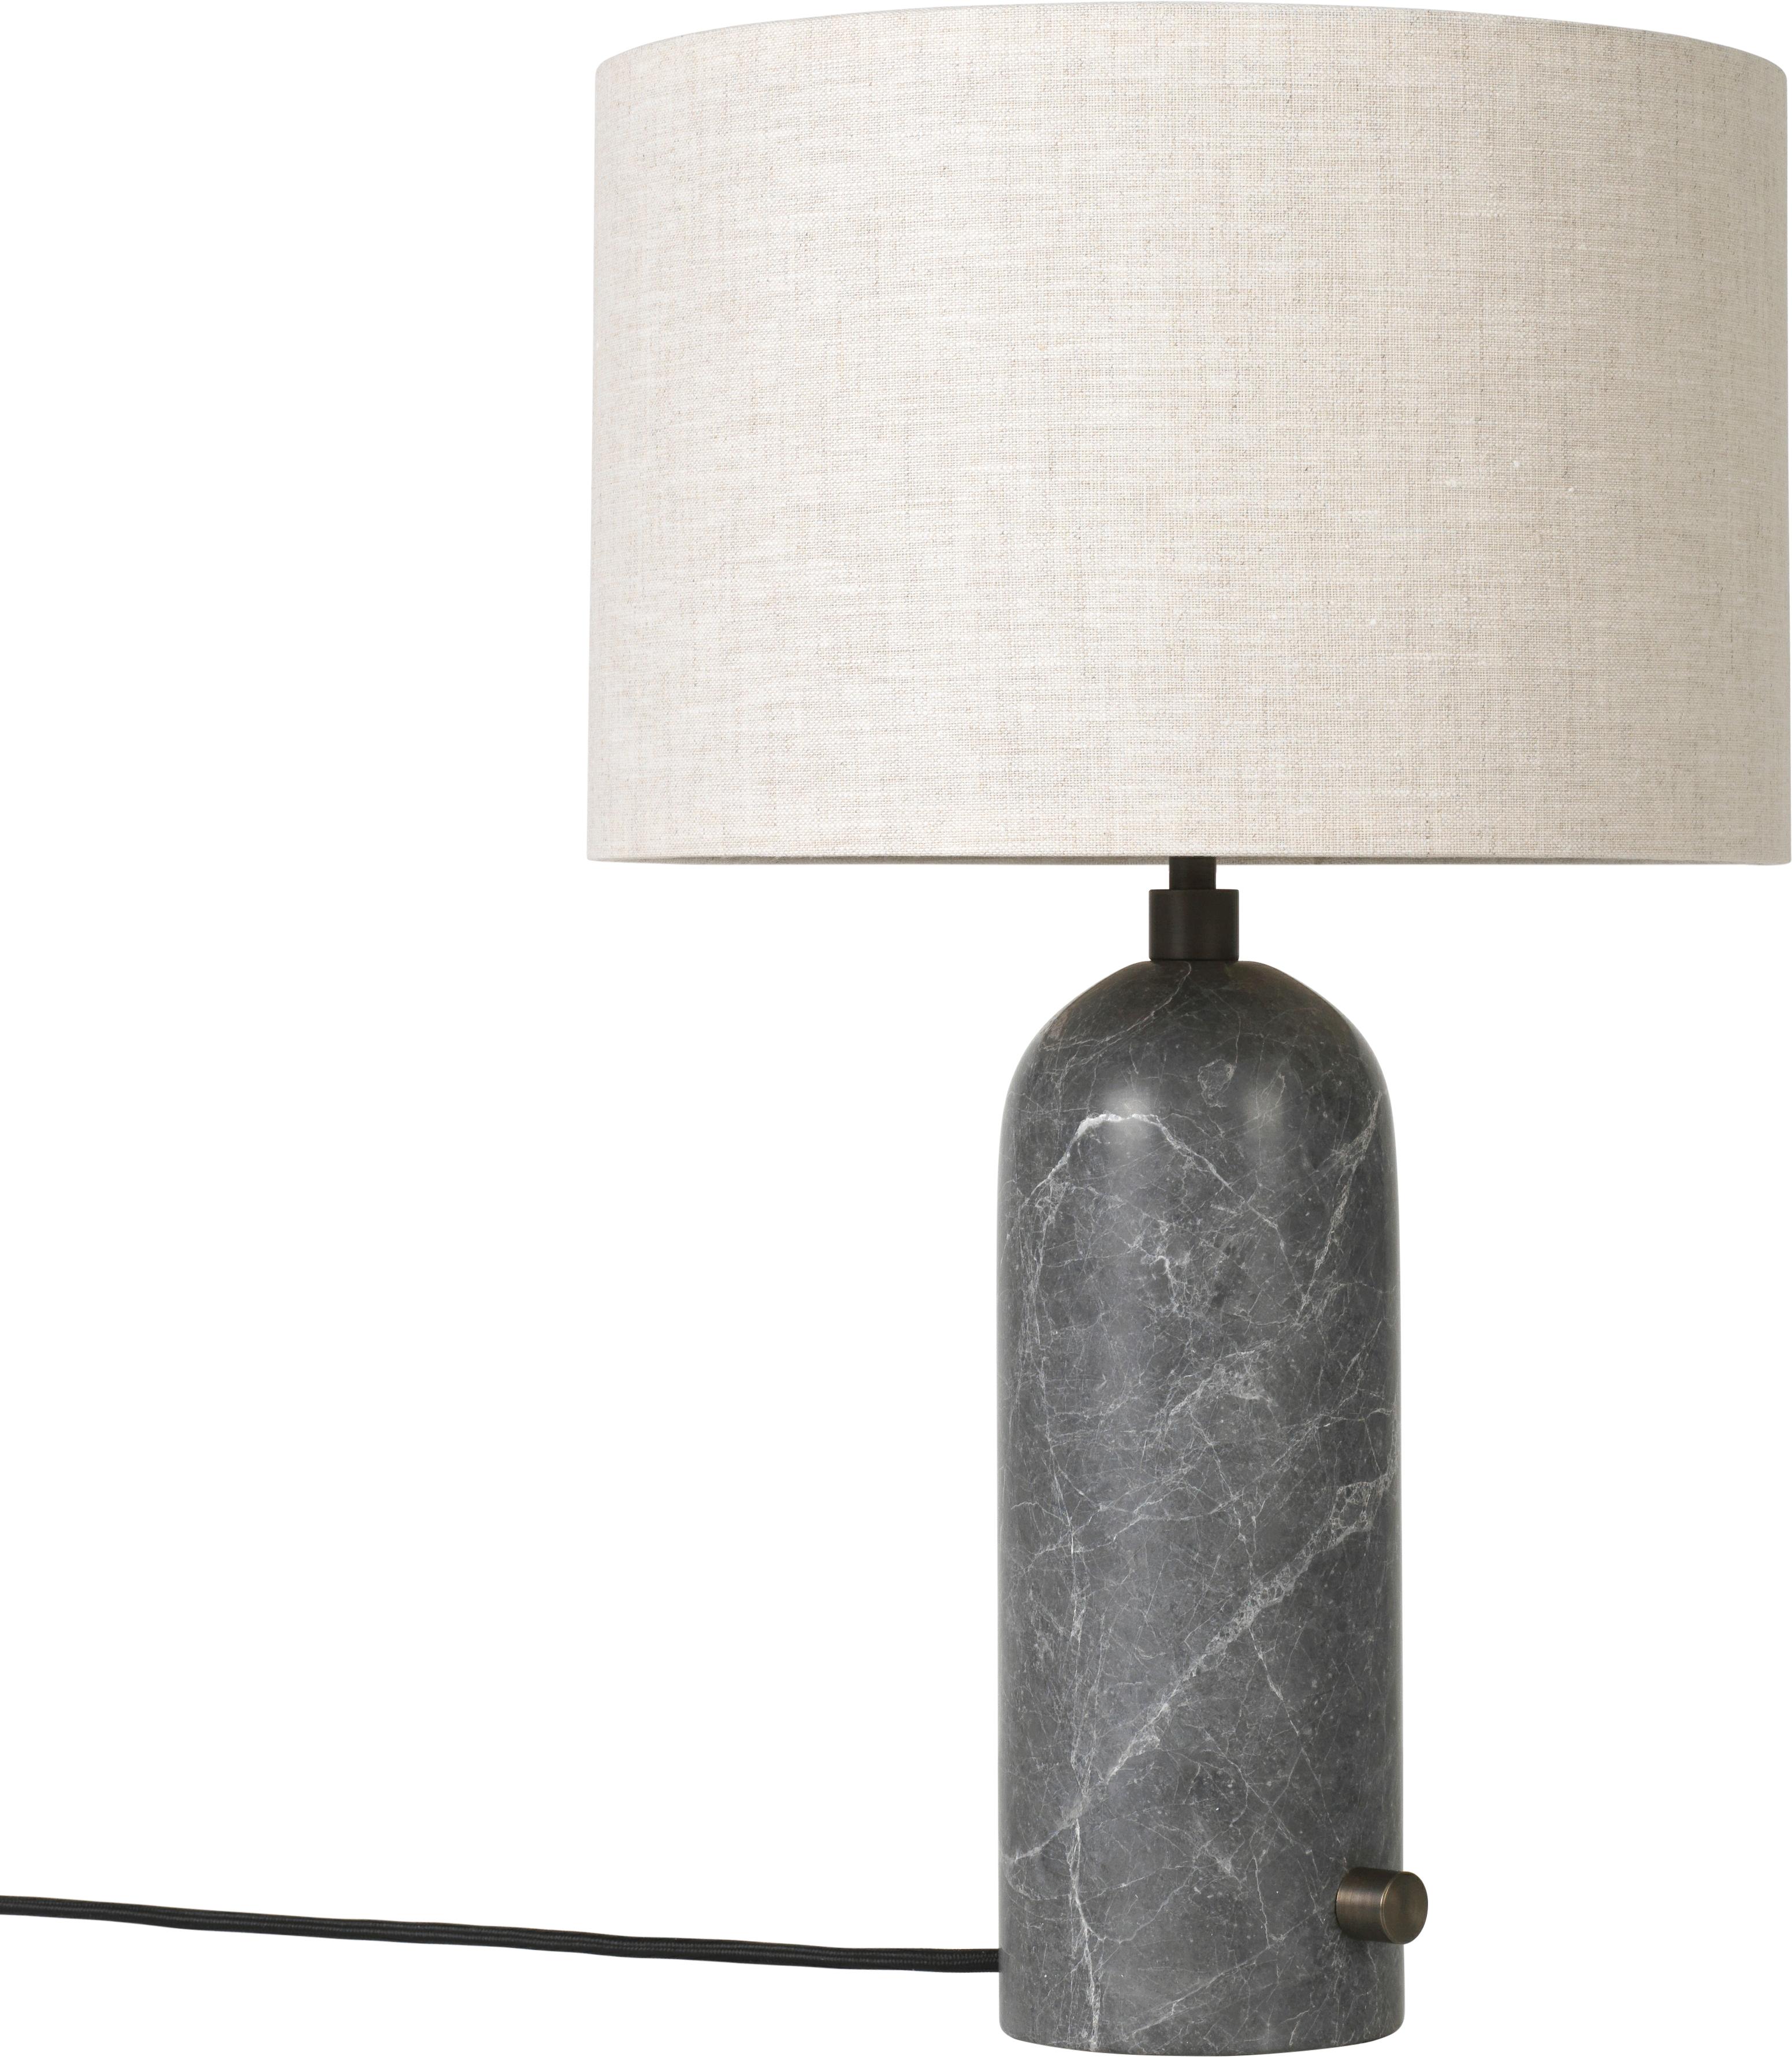 Large 'Gravity' Blackened Steel Table Lamp by Space Copenhagen for Gubi For Sale 7